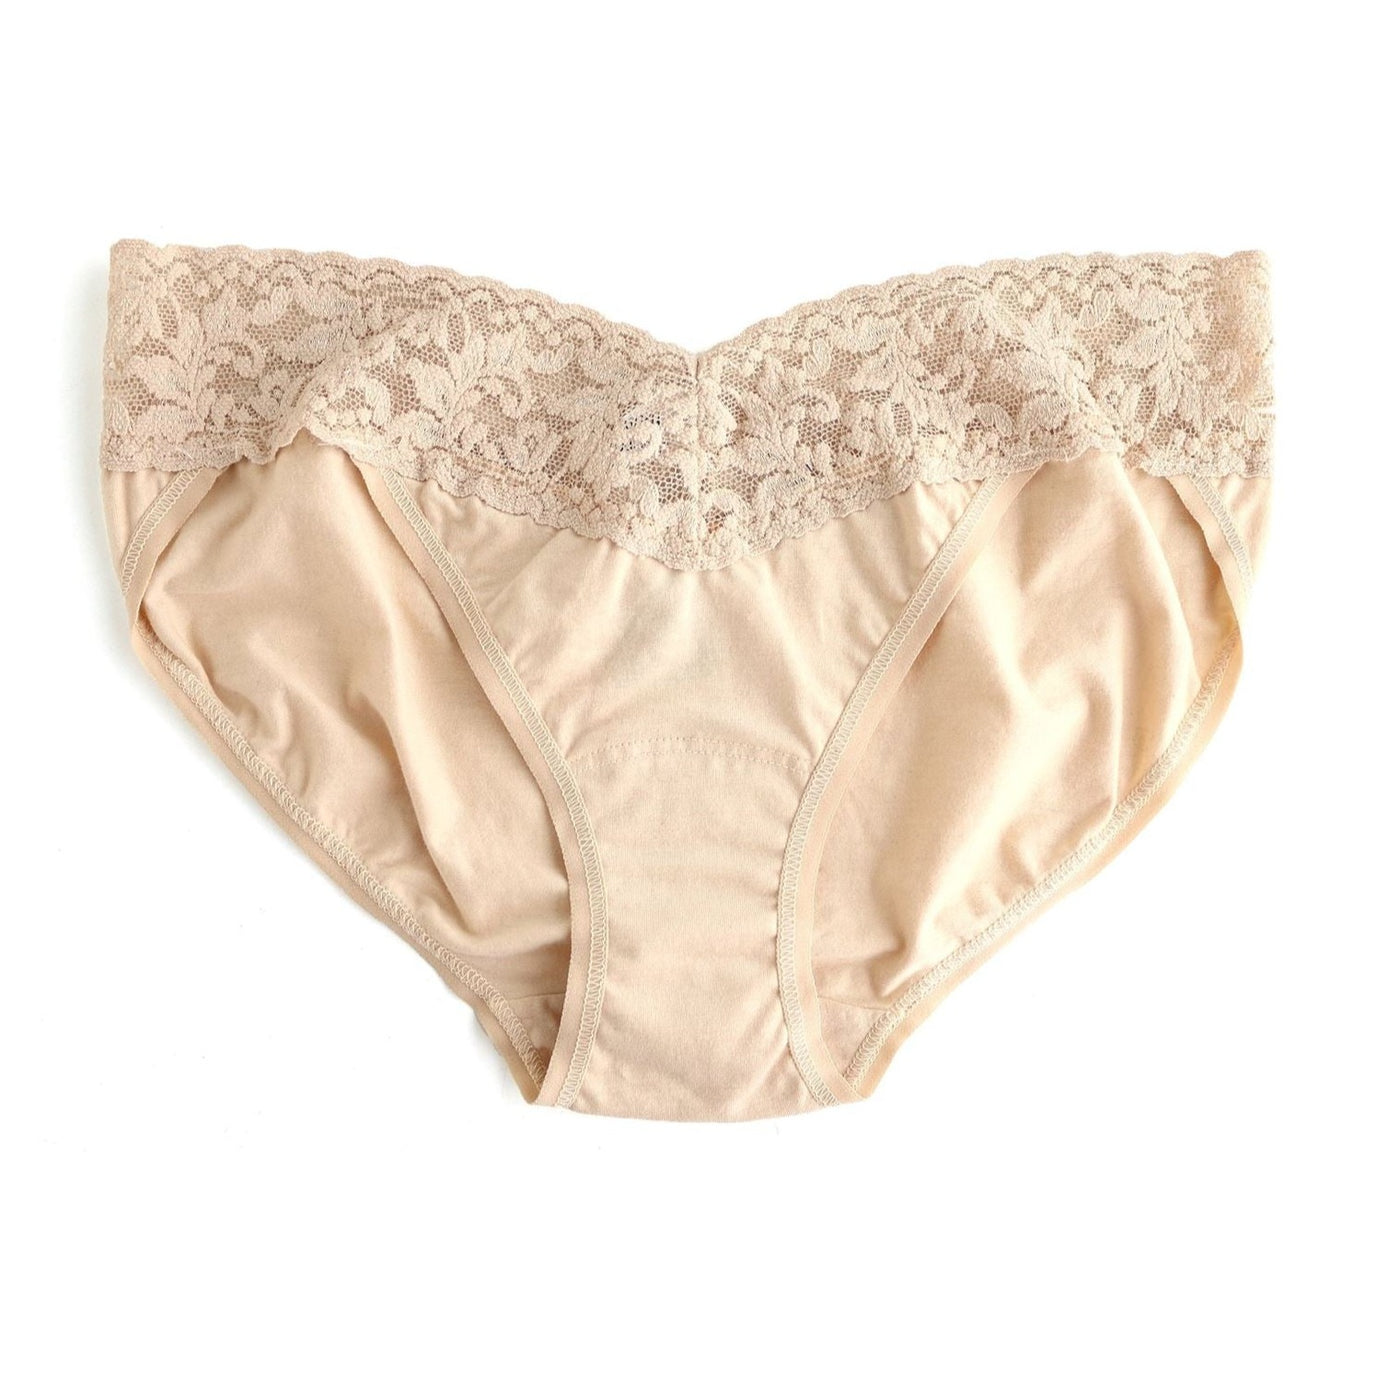 Hanky Panky Supima Chai Cotton V-Kini Panty with Lace Trim | Hanky Panky | Made in the USA | Classy Cozy Cool Women’s American Clothing Boutique